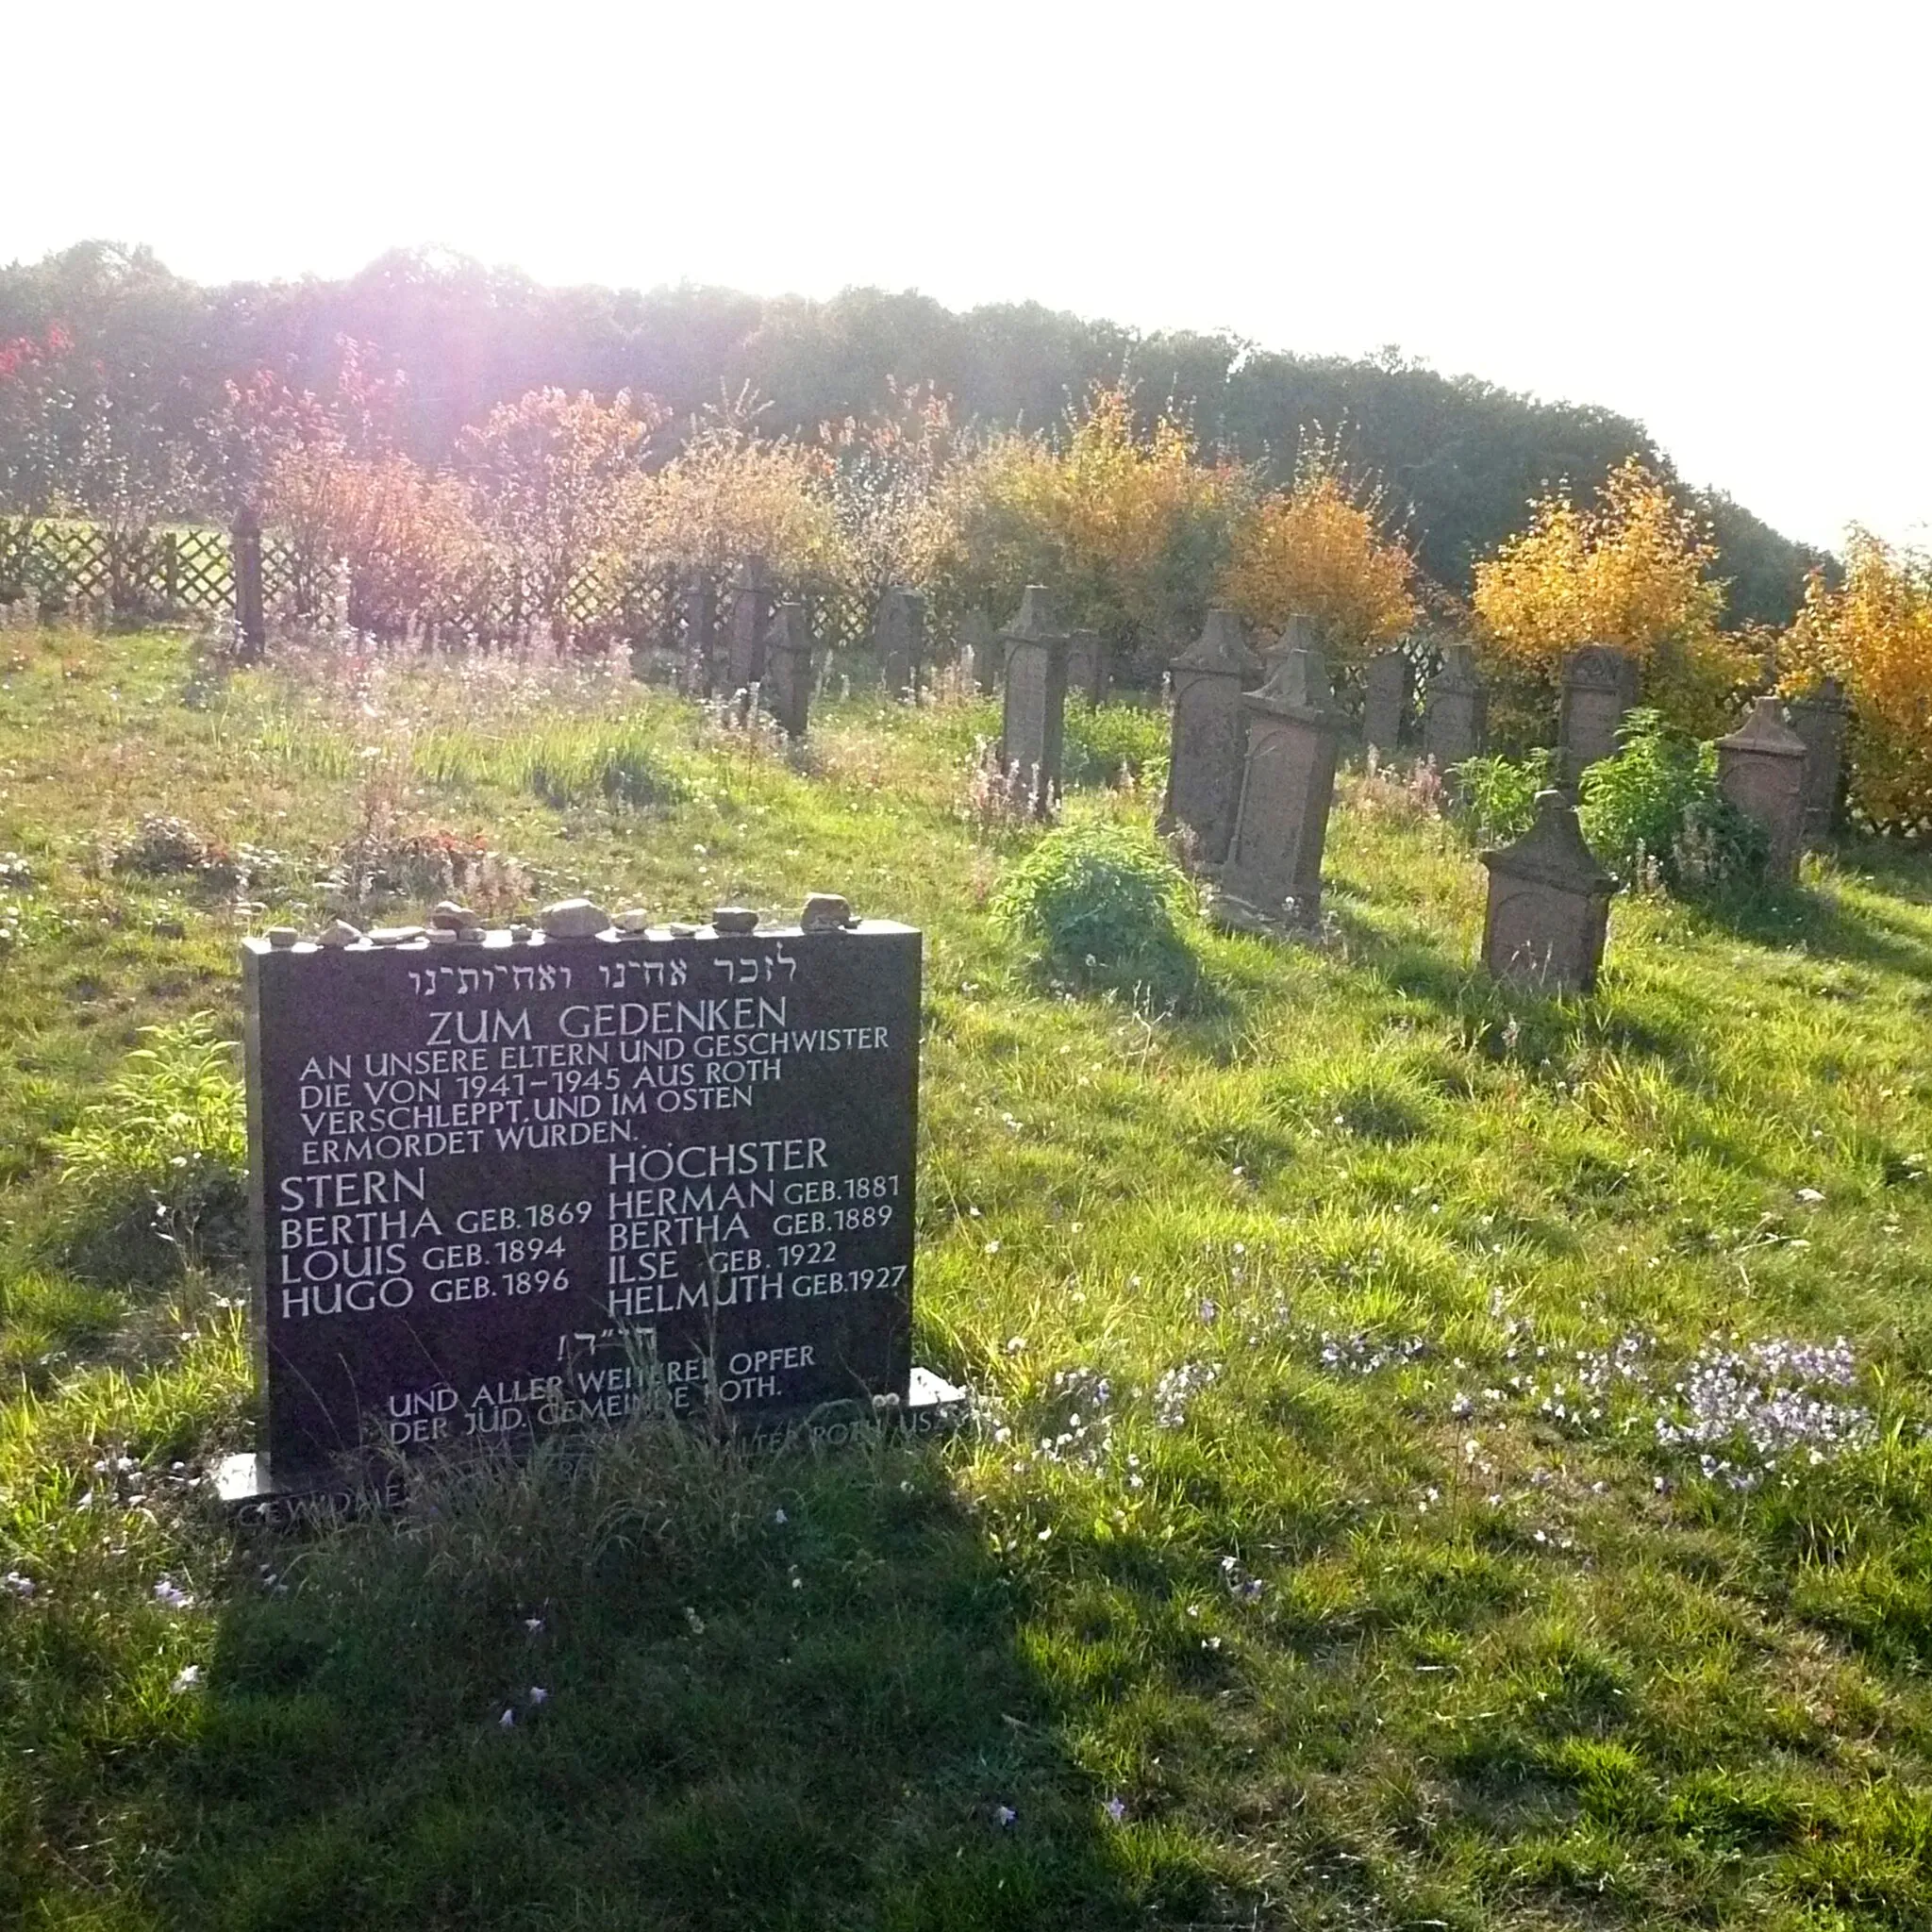 Photo showing: Jewish cemetery in Roth near Marburg, Hesse, Germany